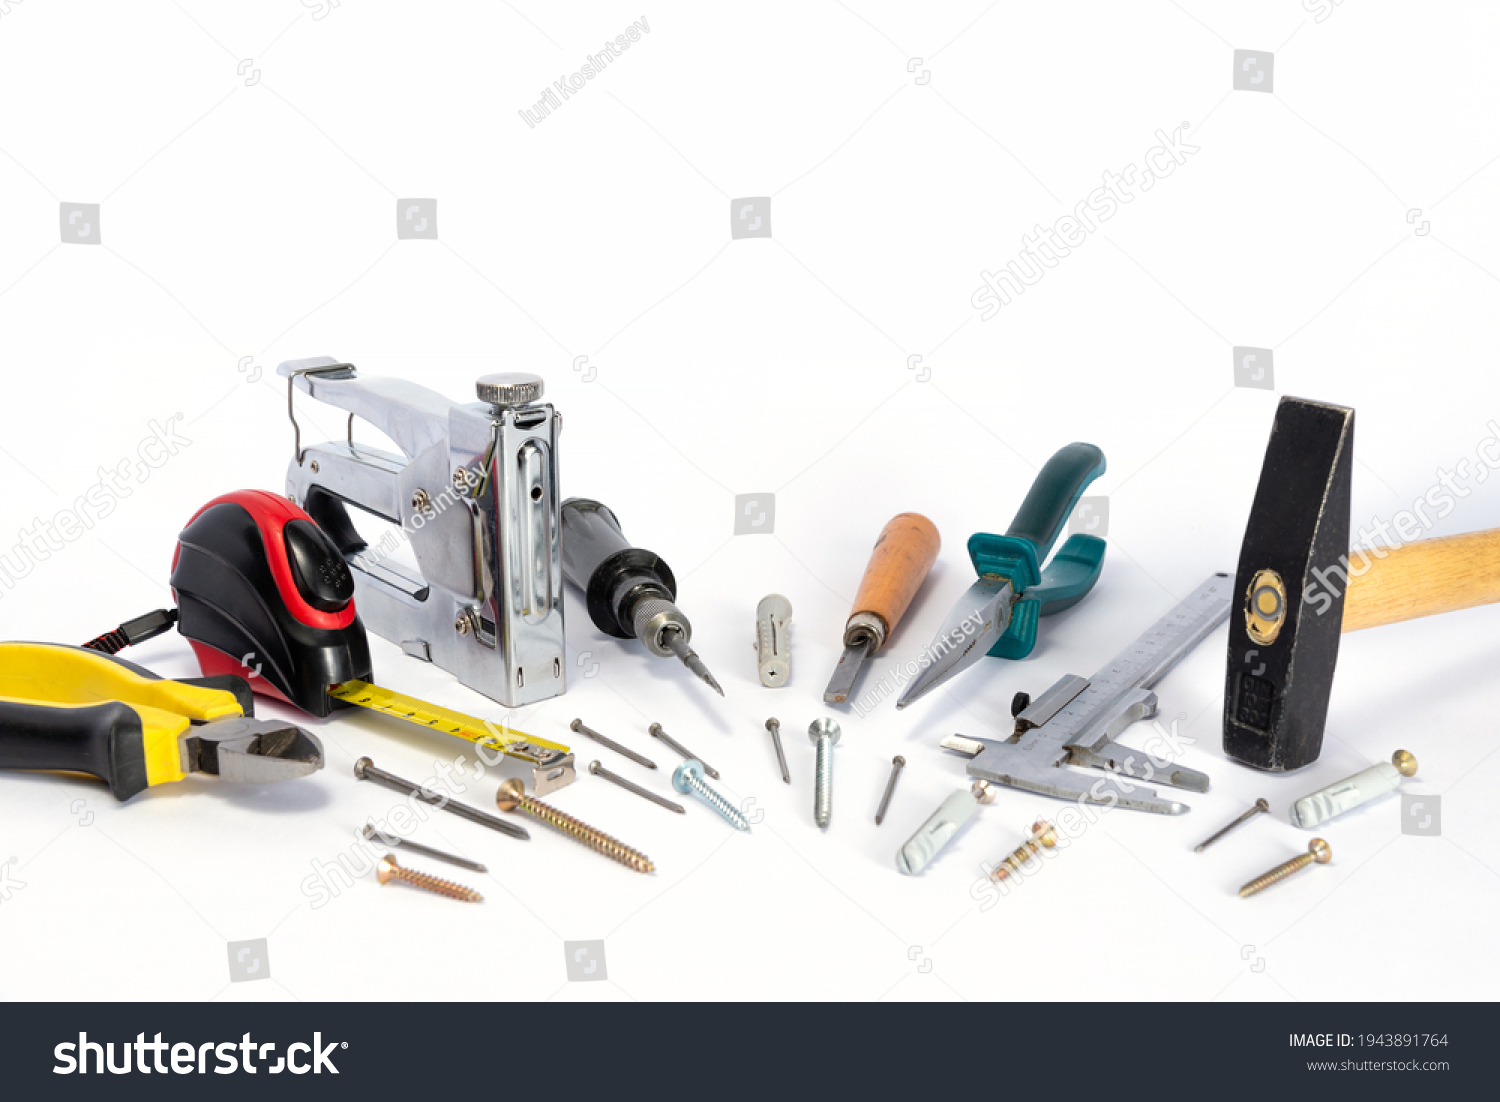 Tools and parts are on a white background. Metal object. A group of repair tools. Various parts and spare parts on the table. Tools for men. A set of working tools. #1943891764